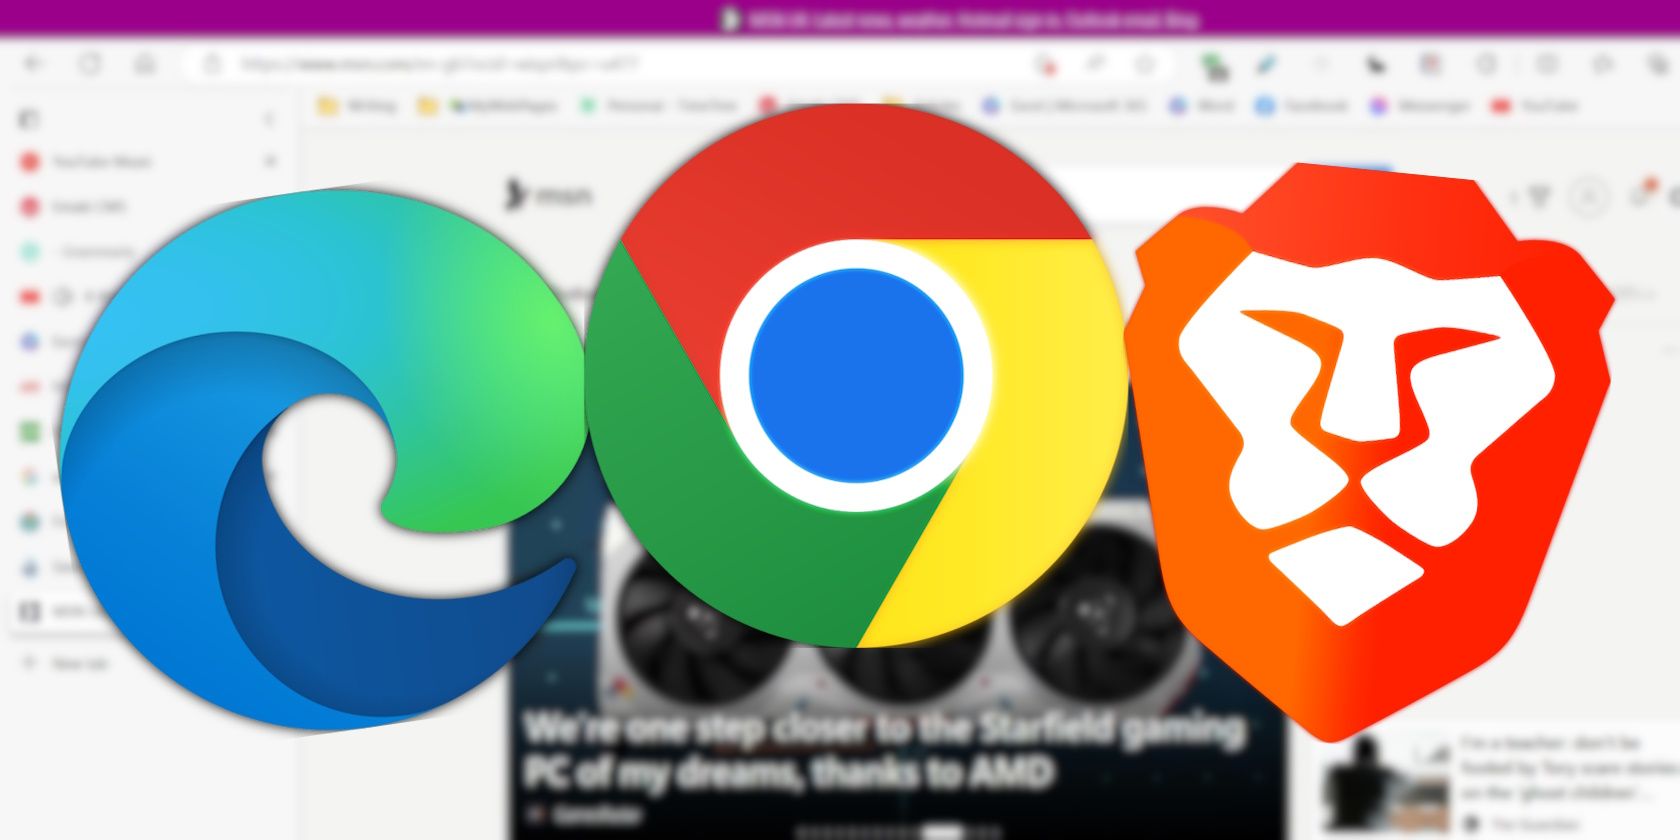 Reduce Browser Clutter with OneTab and Increase Productivity – Family Locket